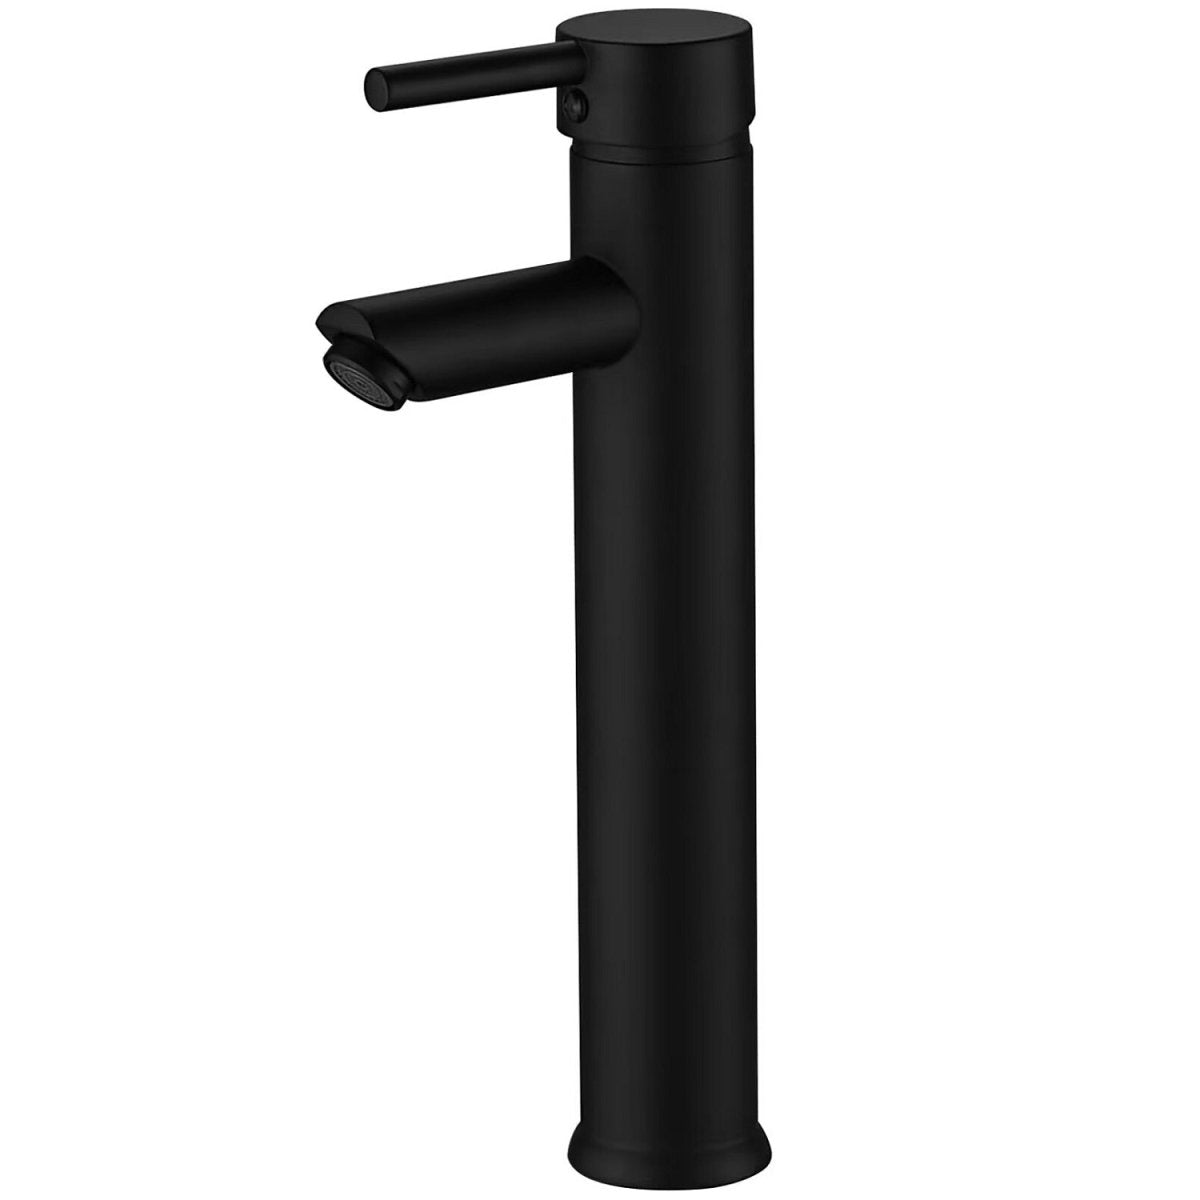 Single Hole Bathroom Faucet with Supply Hose in Matte Black - buyfaucet.com